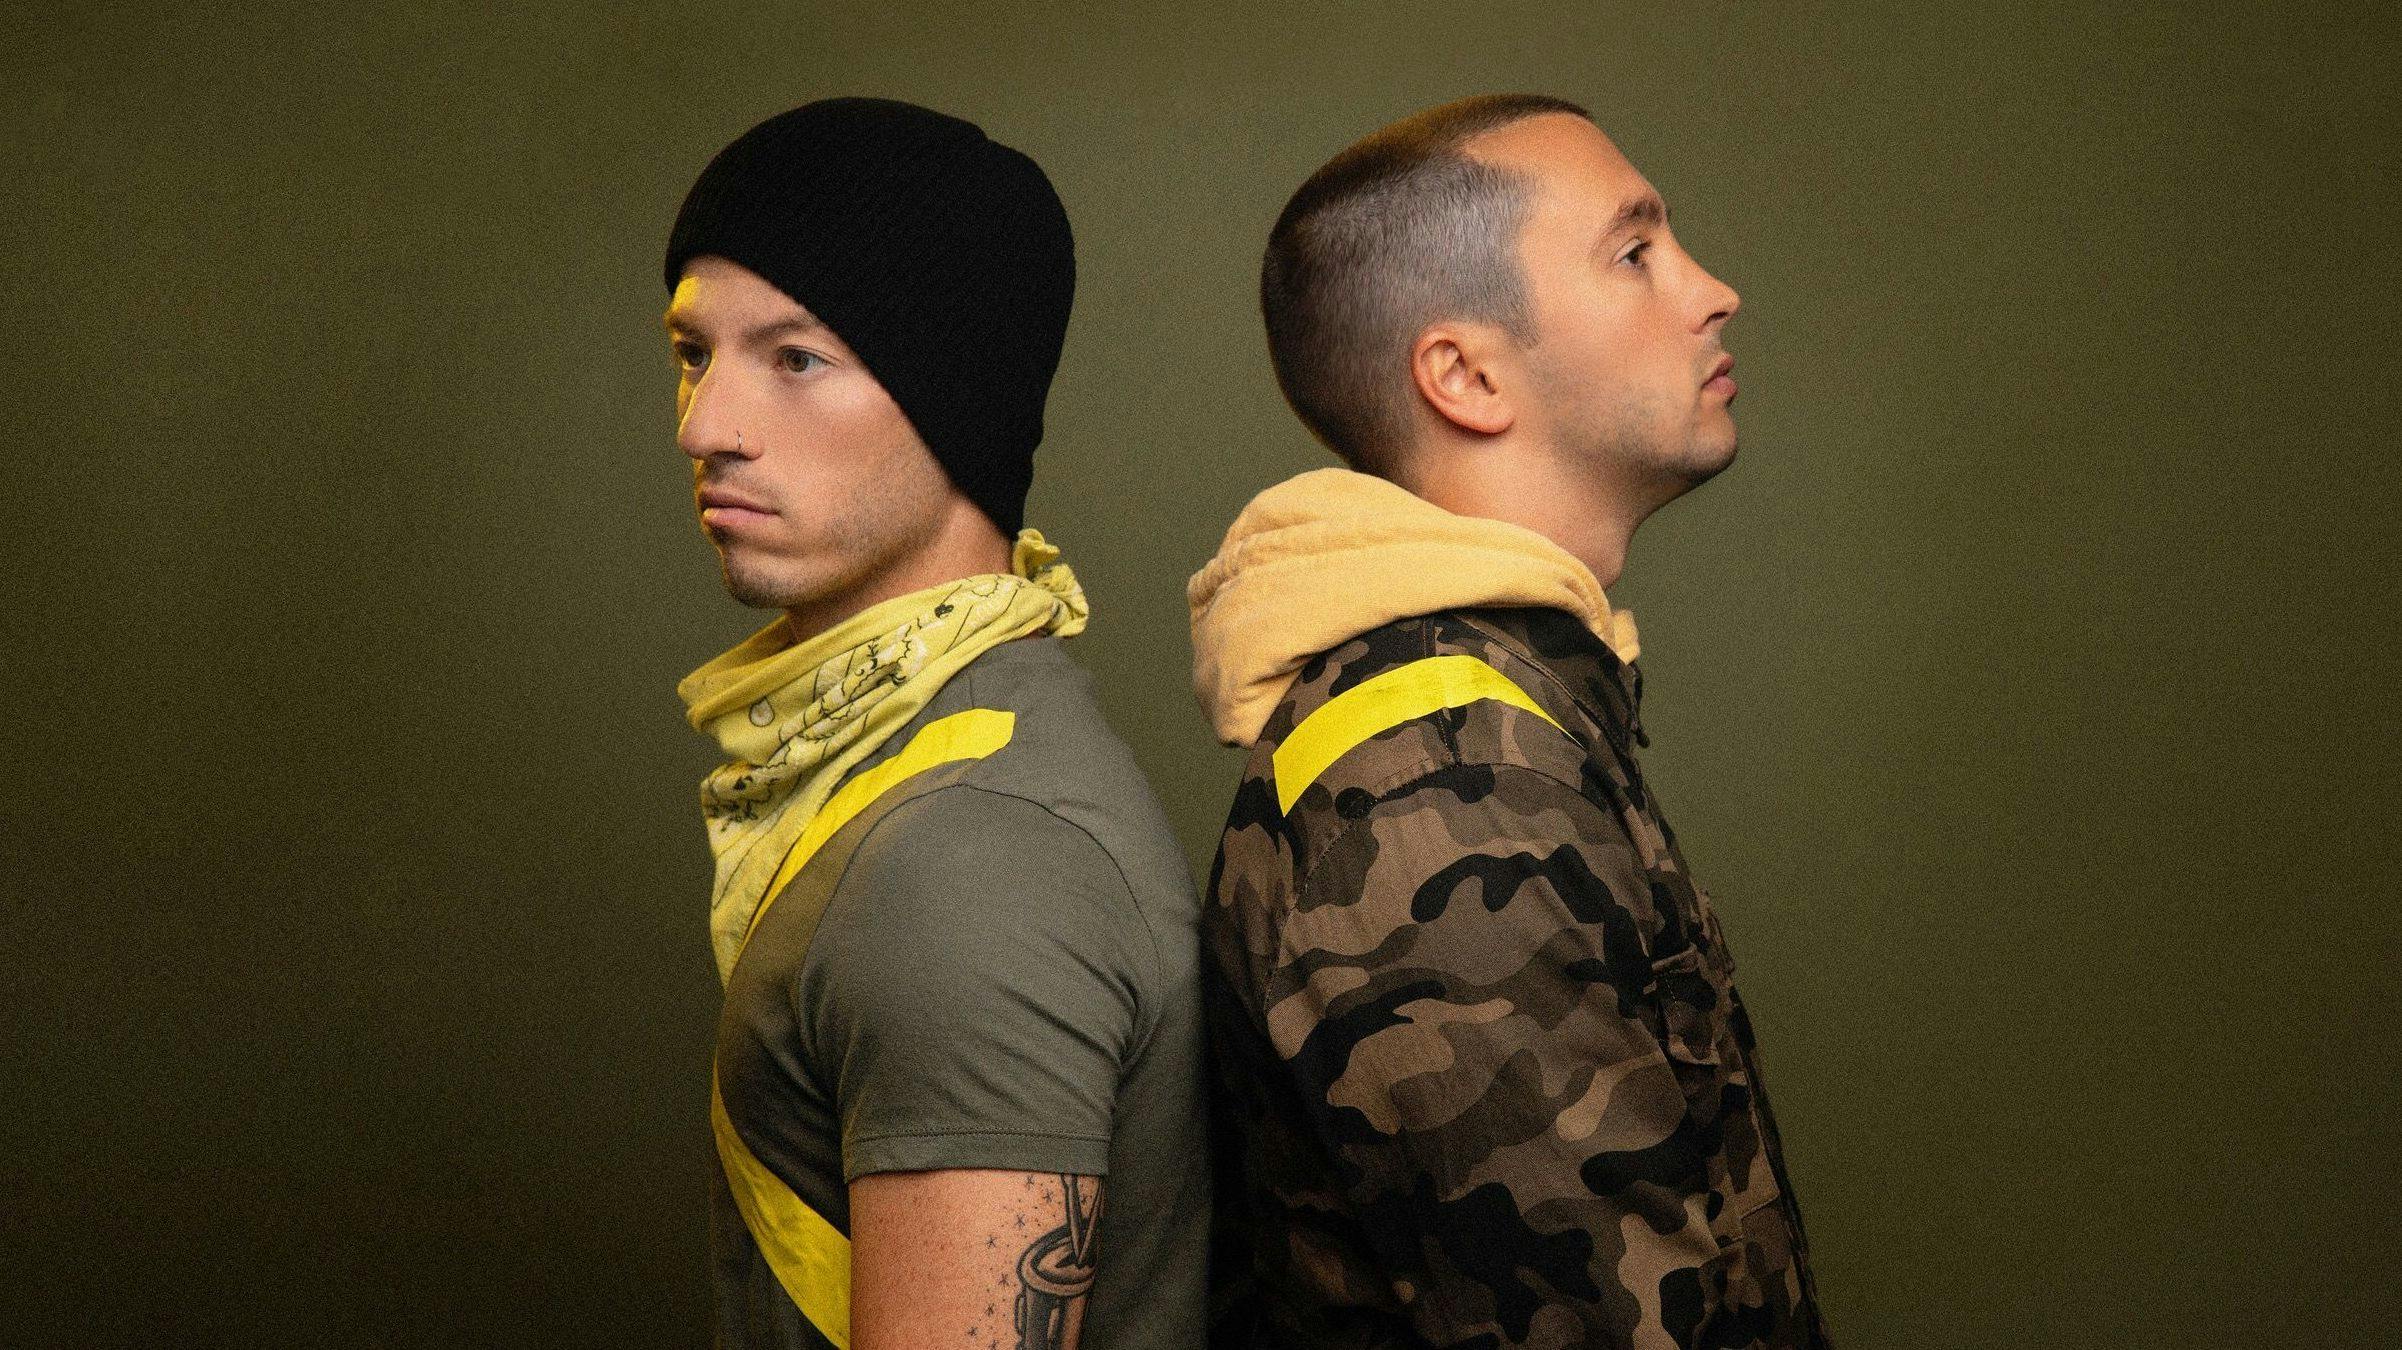 twenty one pilots "We're Both Deeply Passionate About What We Do